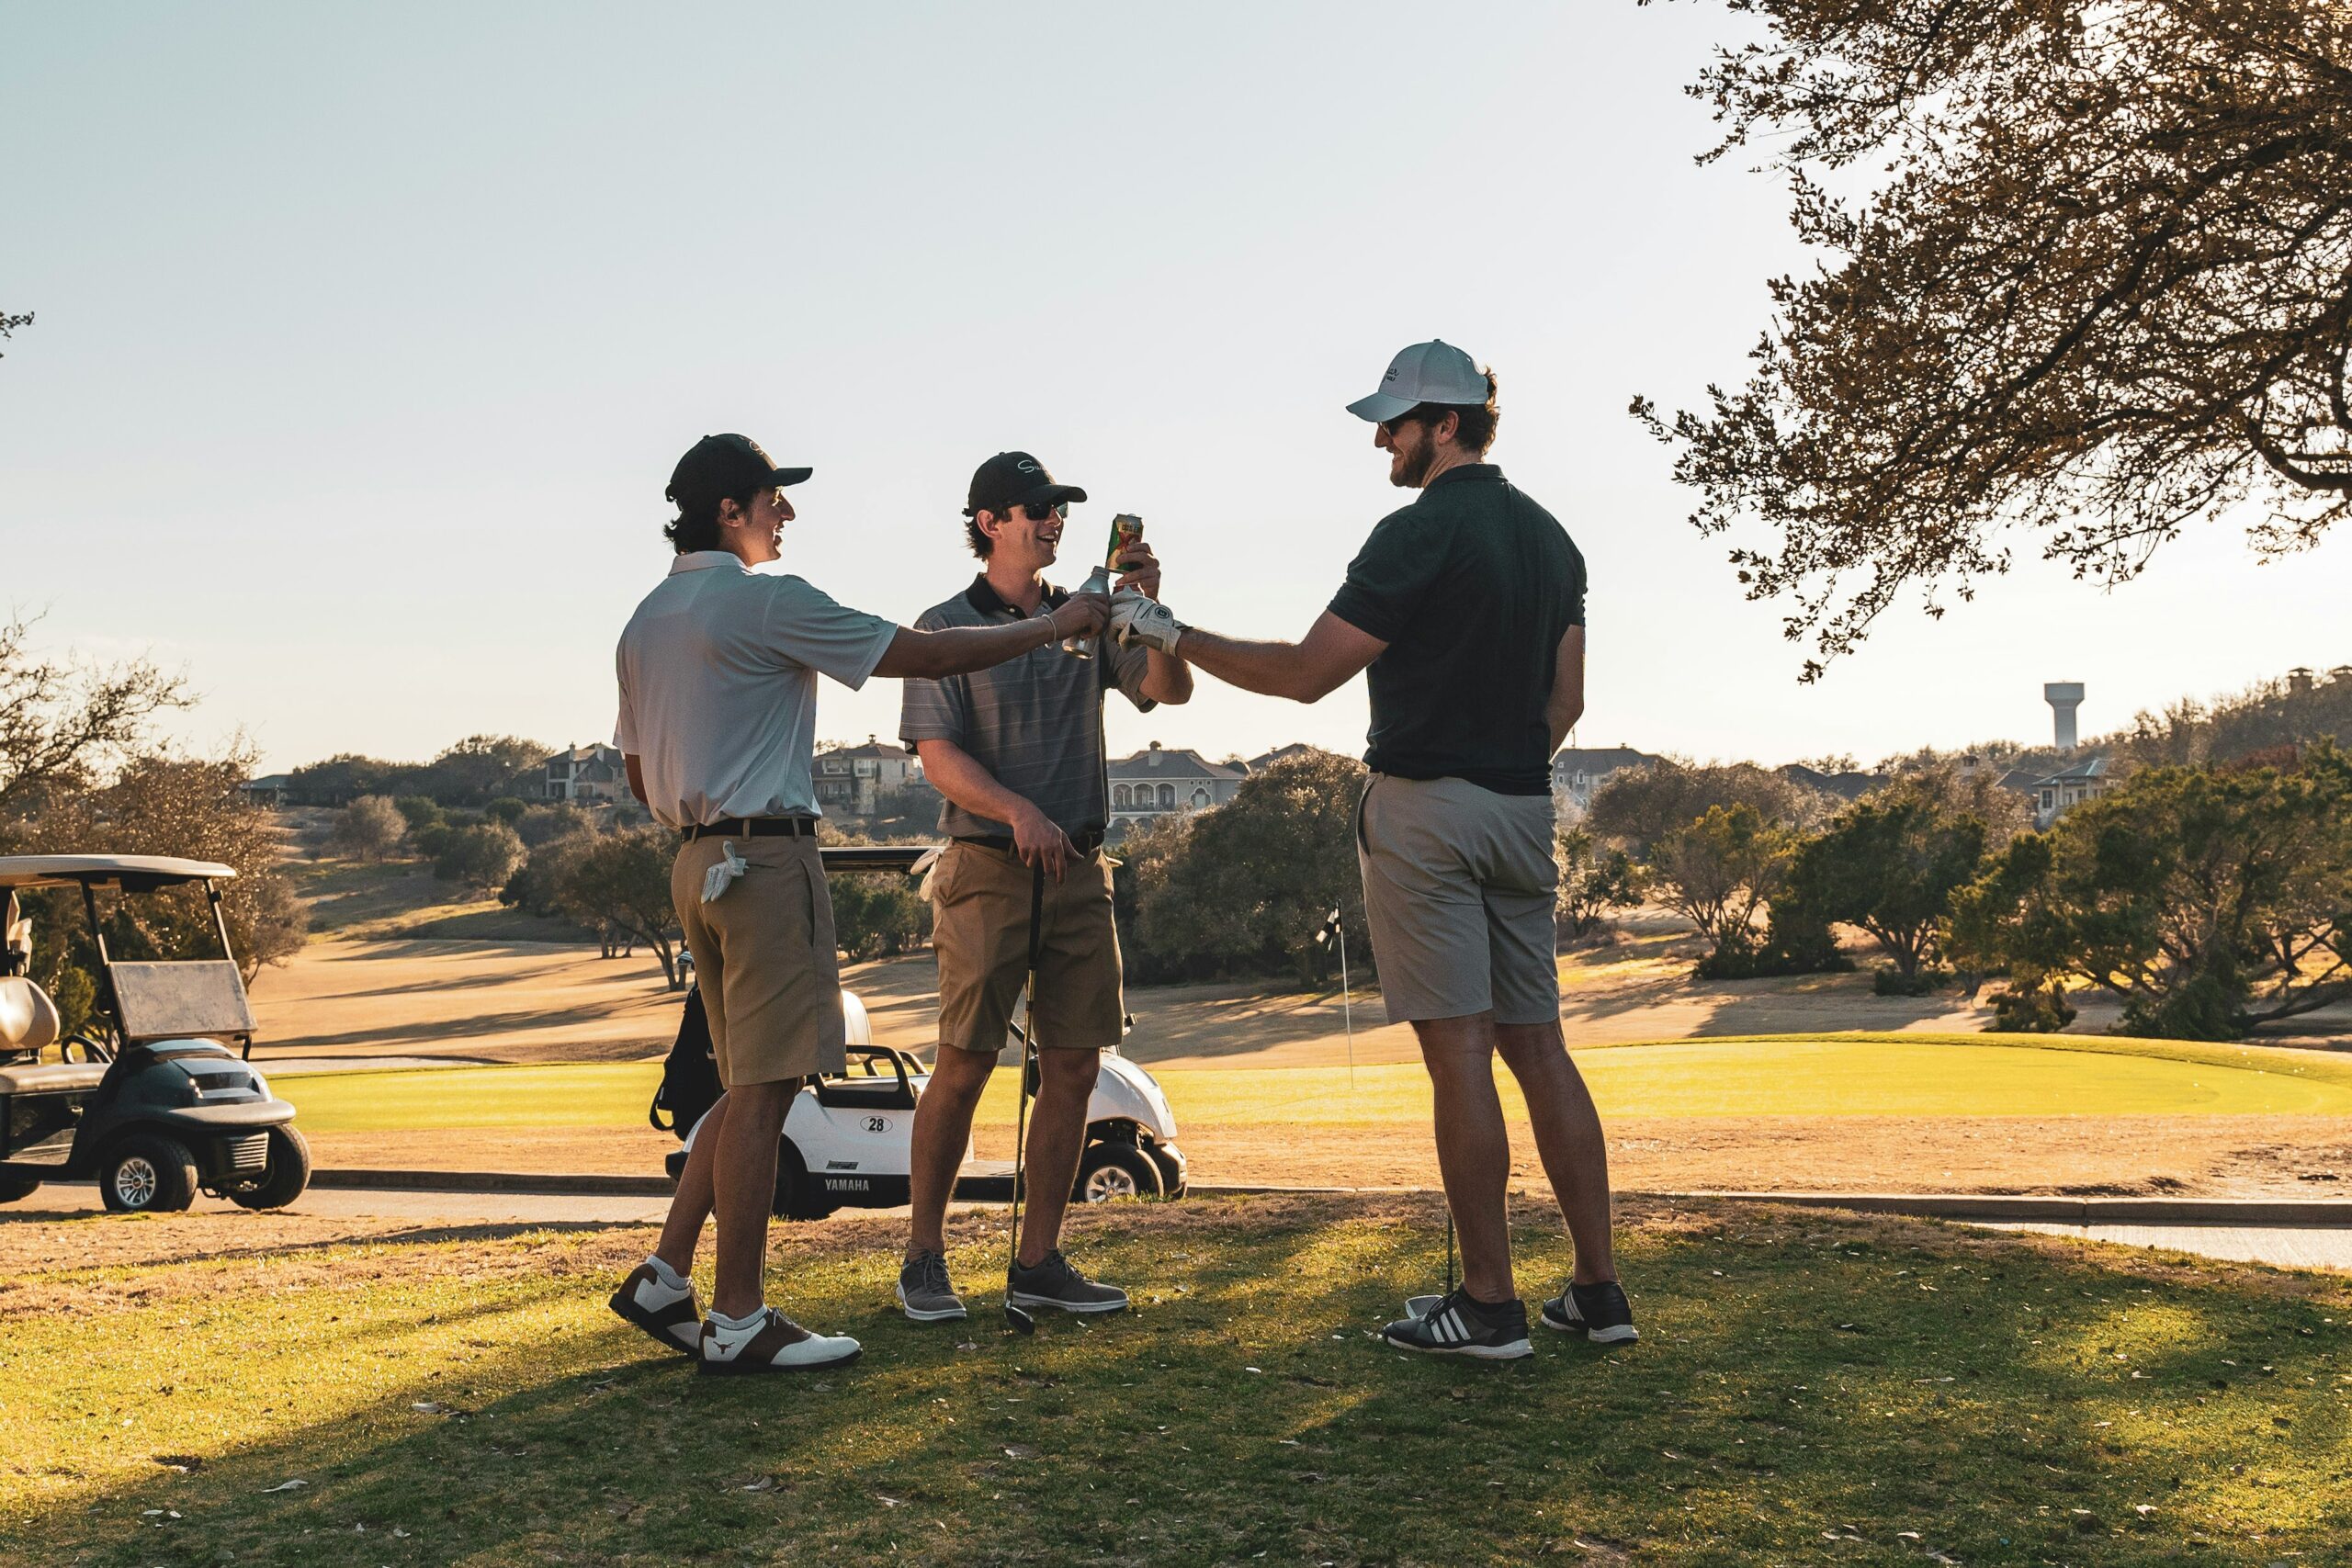 Stay hydrated on the golf course